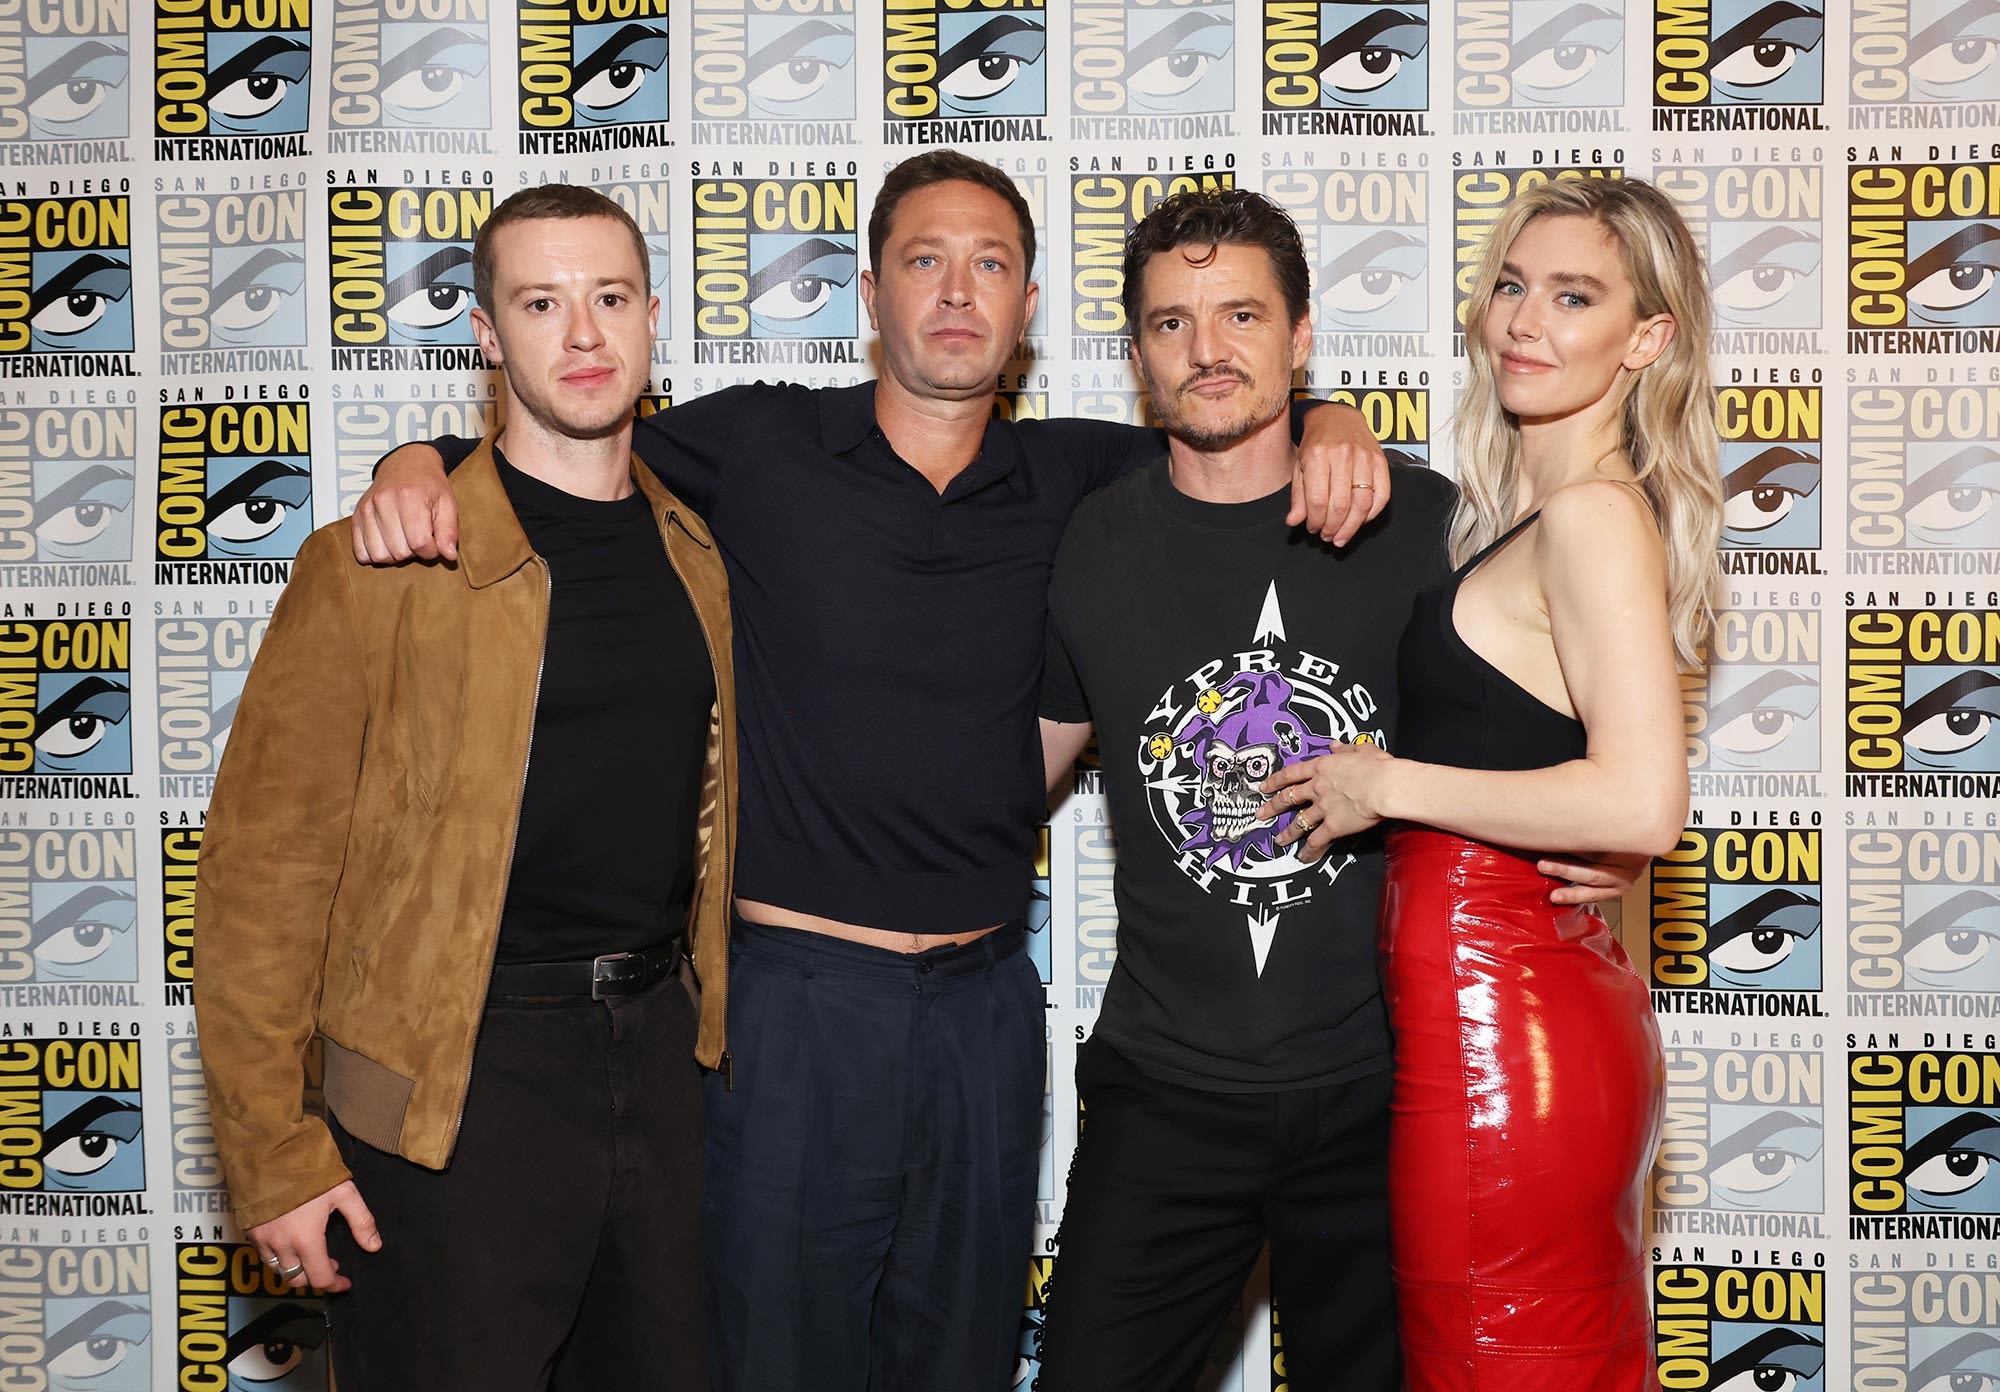 Everything to Know About Marvel’s ‘The Fantastic Four’ Movie Starring Pedro Pascal and Vanessa Kirby